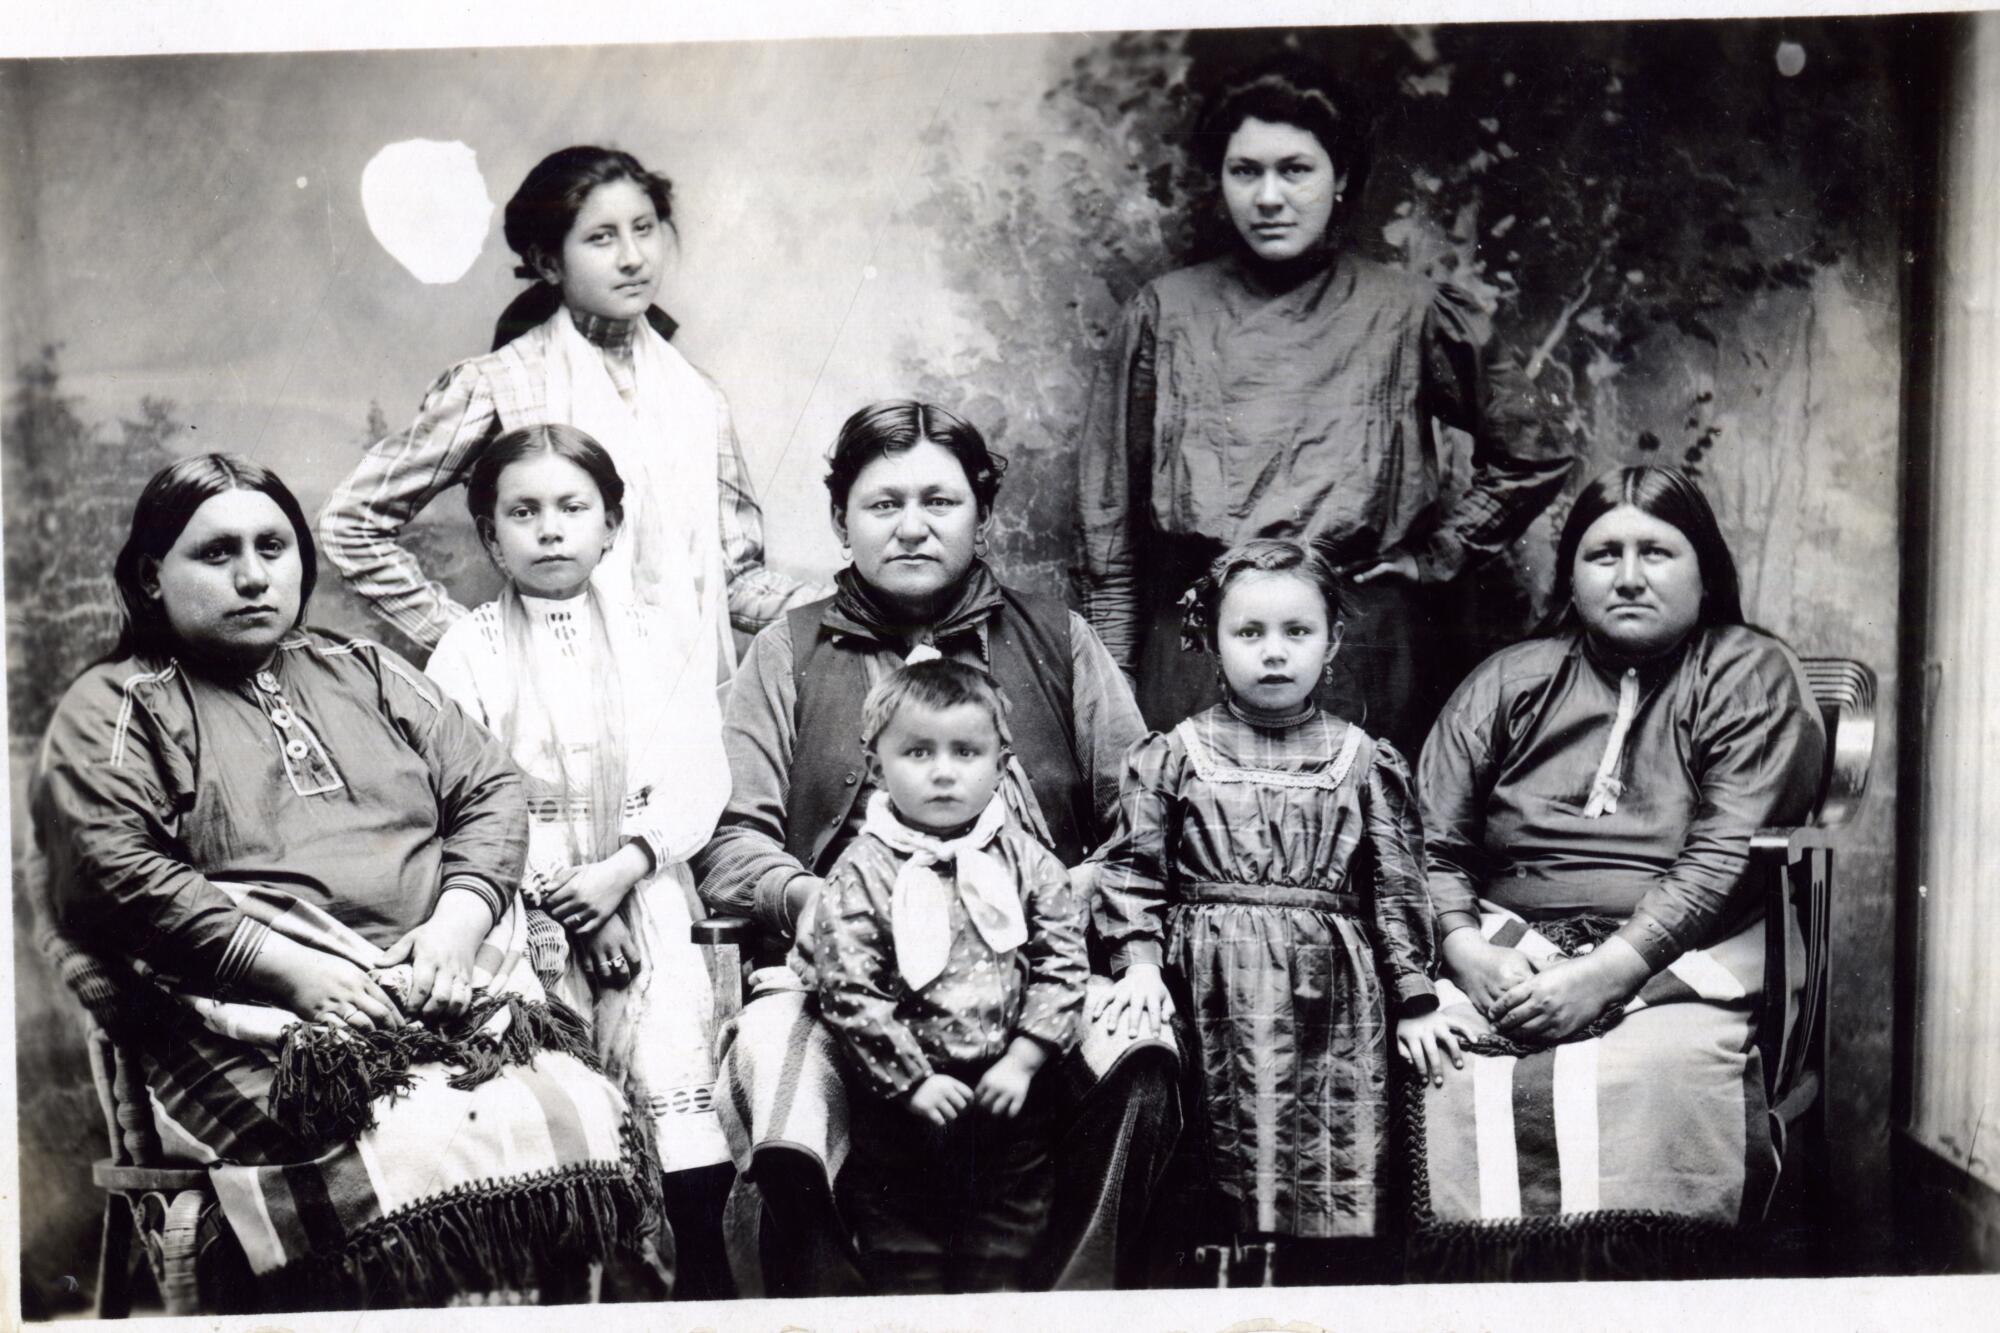 A postcard shows a group of women and children of the Osage Nation.